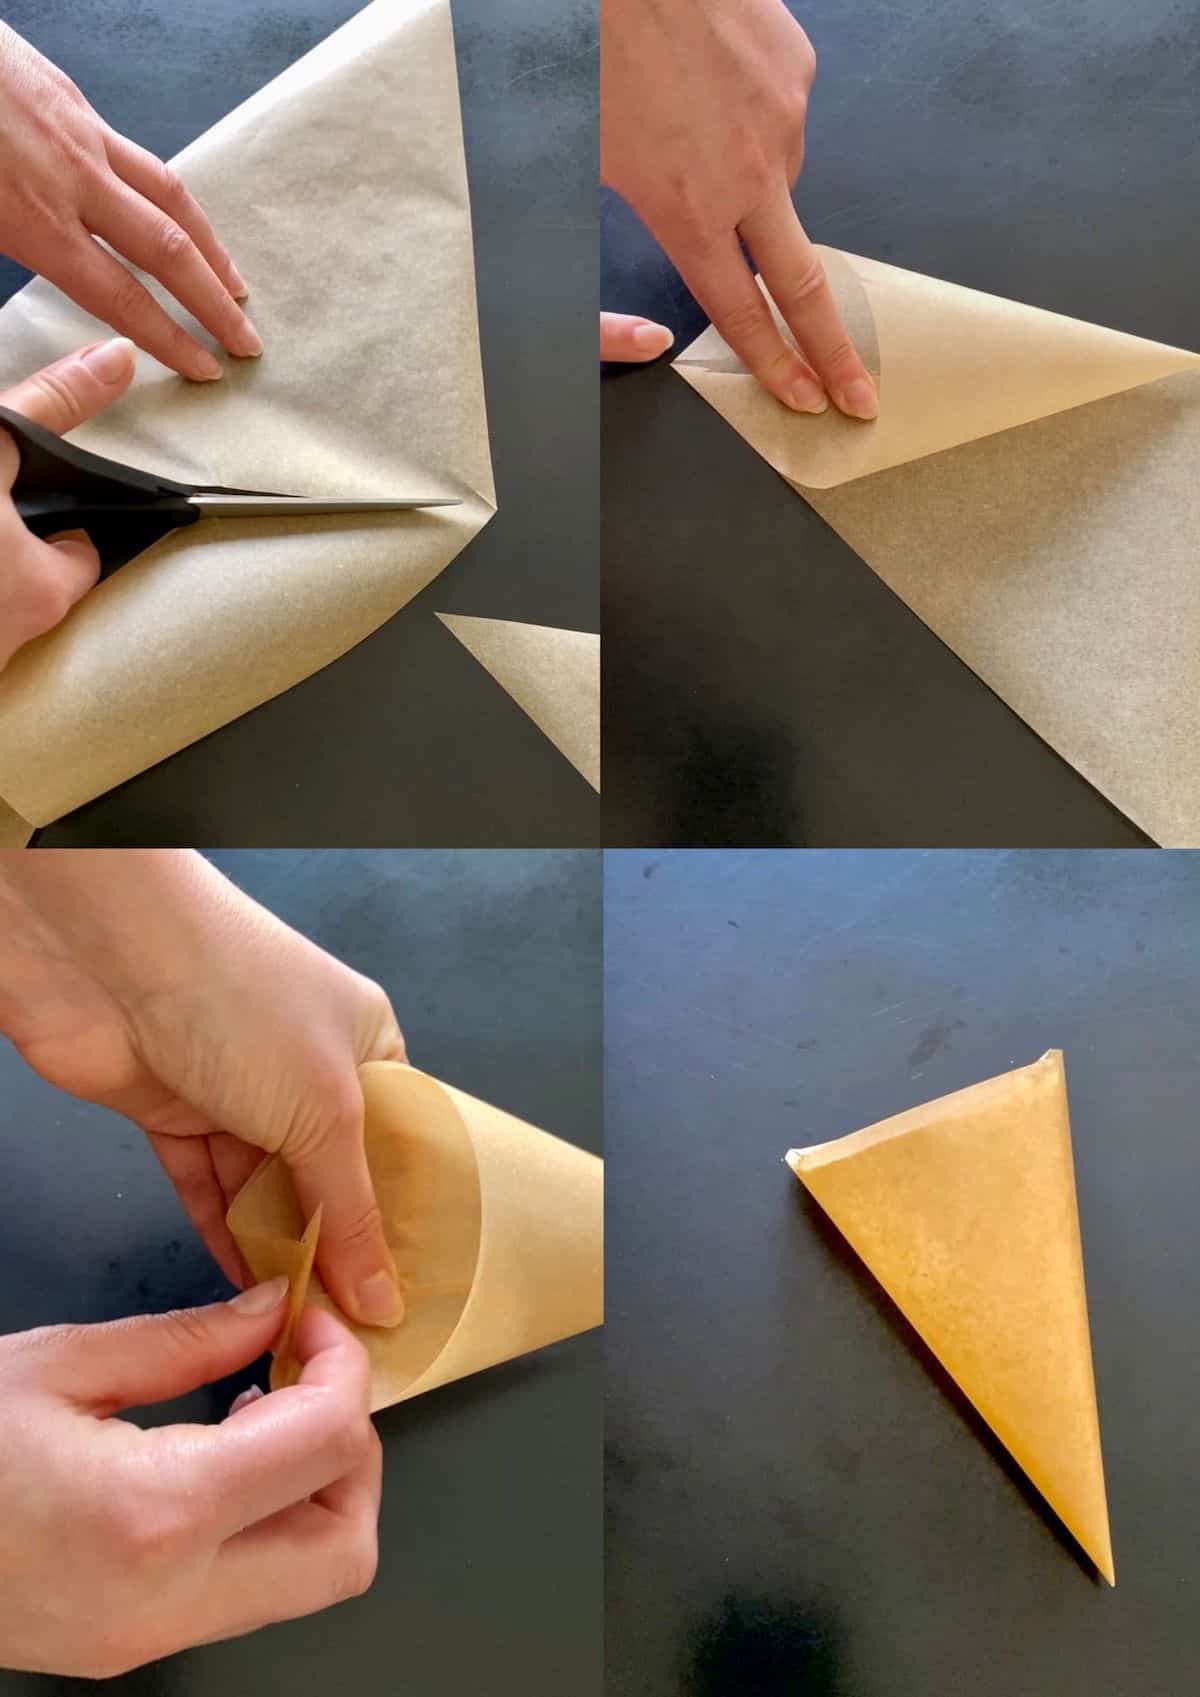 A demonstration of how to make a piping bag for melted chocolate using a triangle shaped piece of baking paper and rolling it into a cone shape